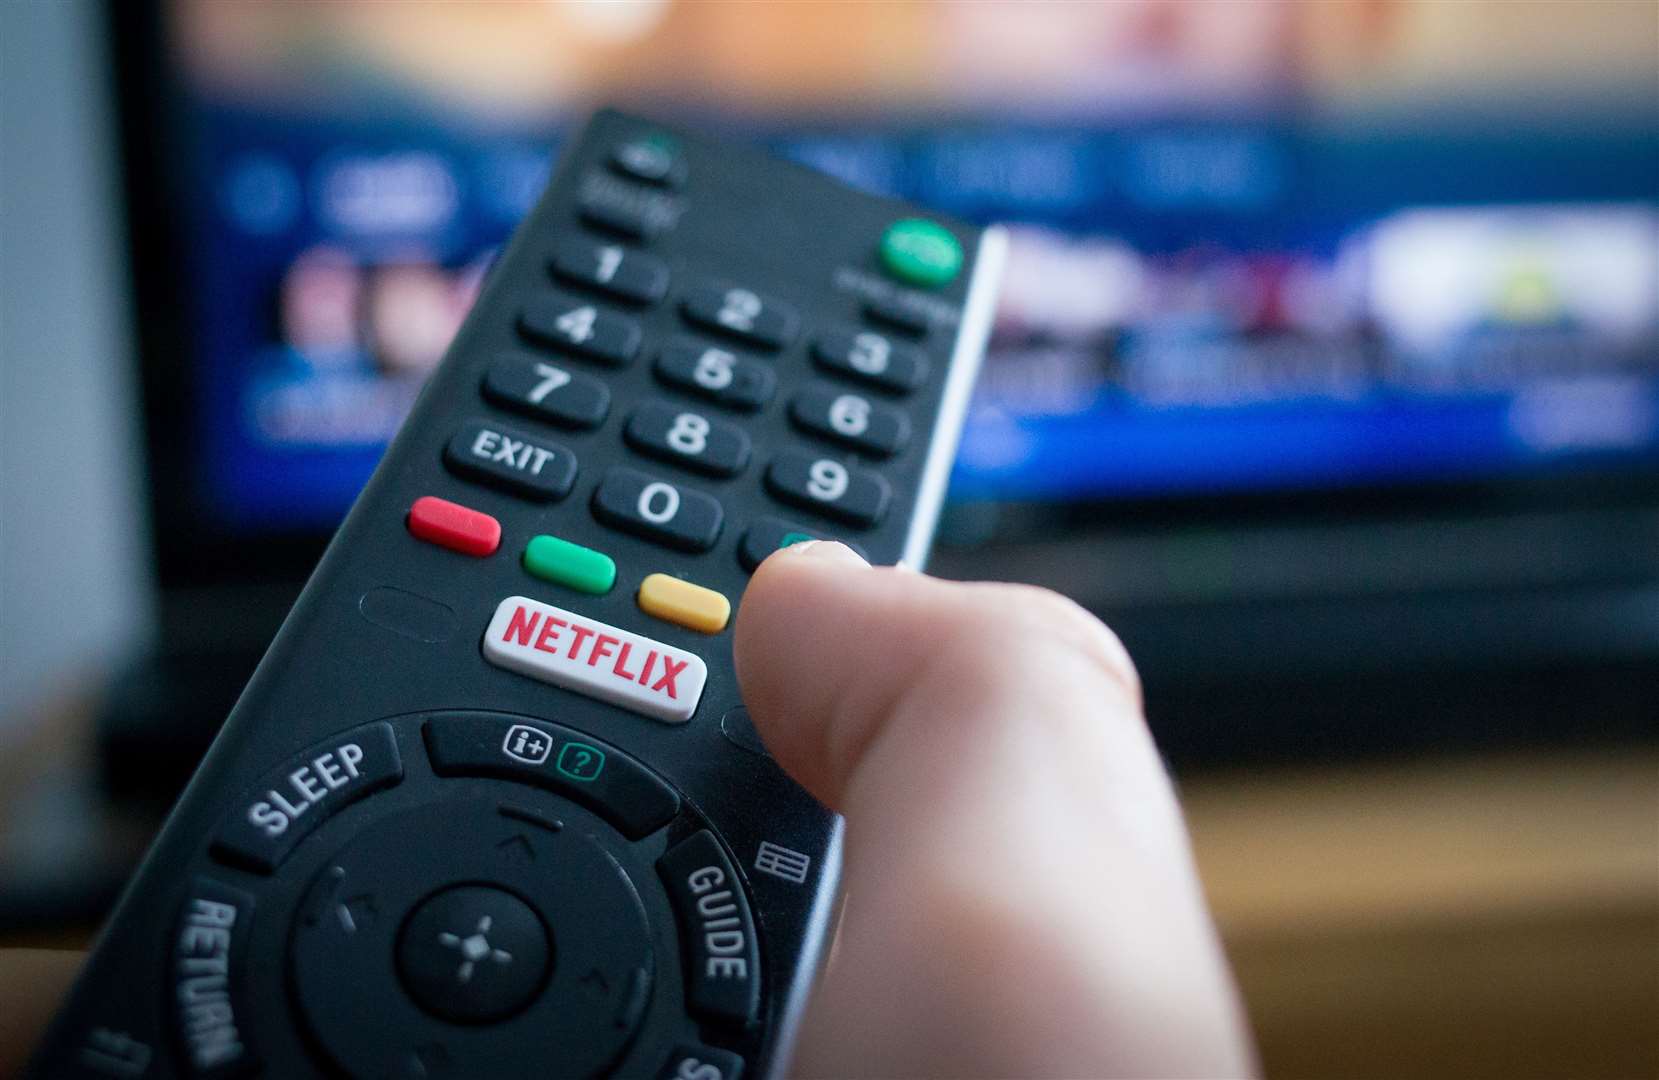 Netflix is axing its standard ad-free plan. Image: iStock.